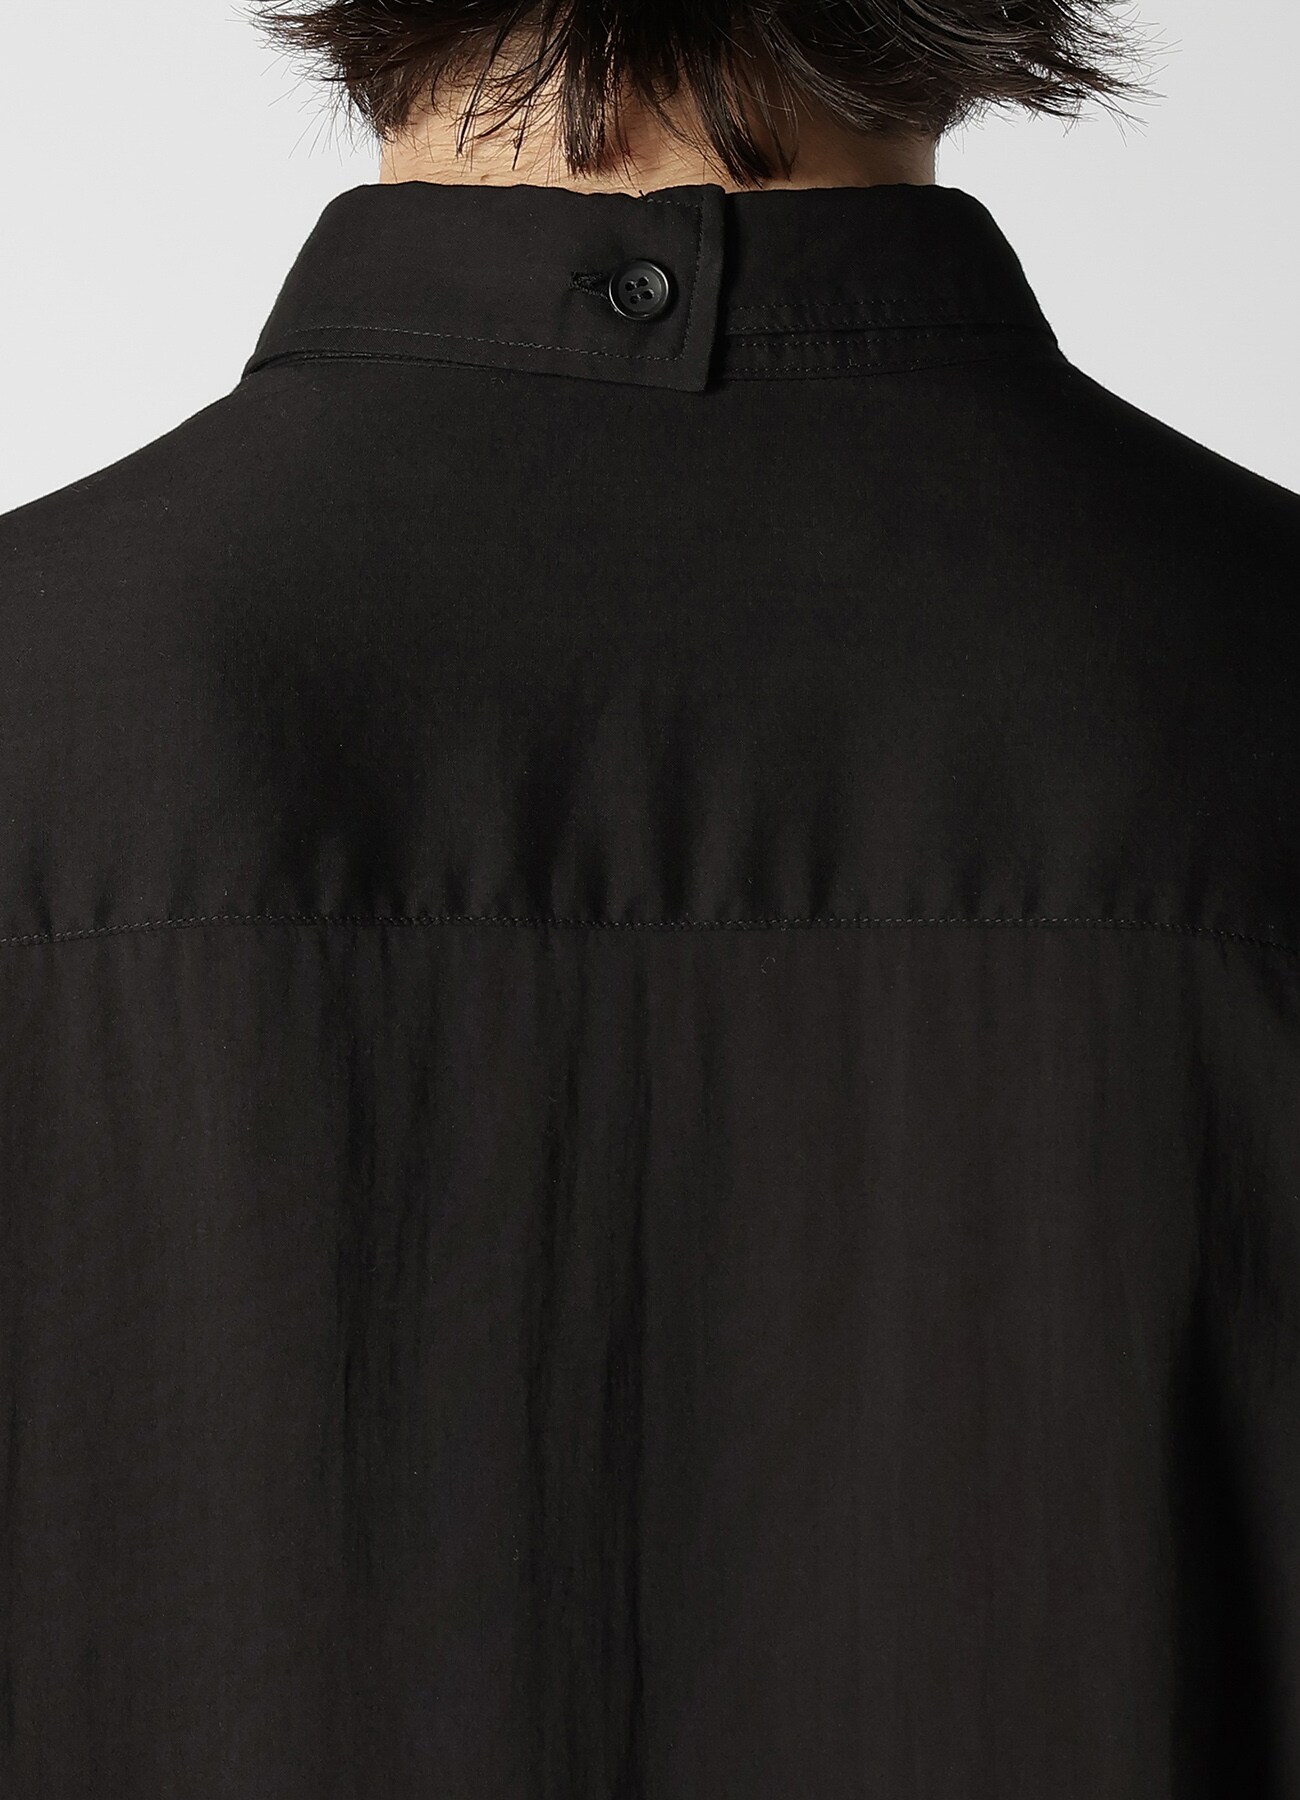 CELLULOSE LAWN SHIRT WITH ASYMMETRY COLLAR(S Black): Y's for men 